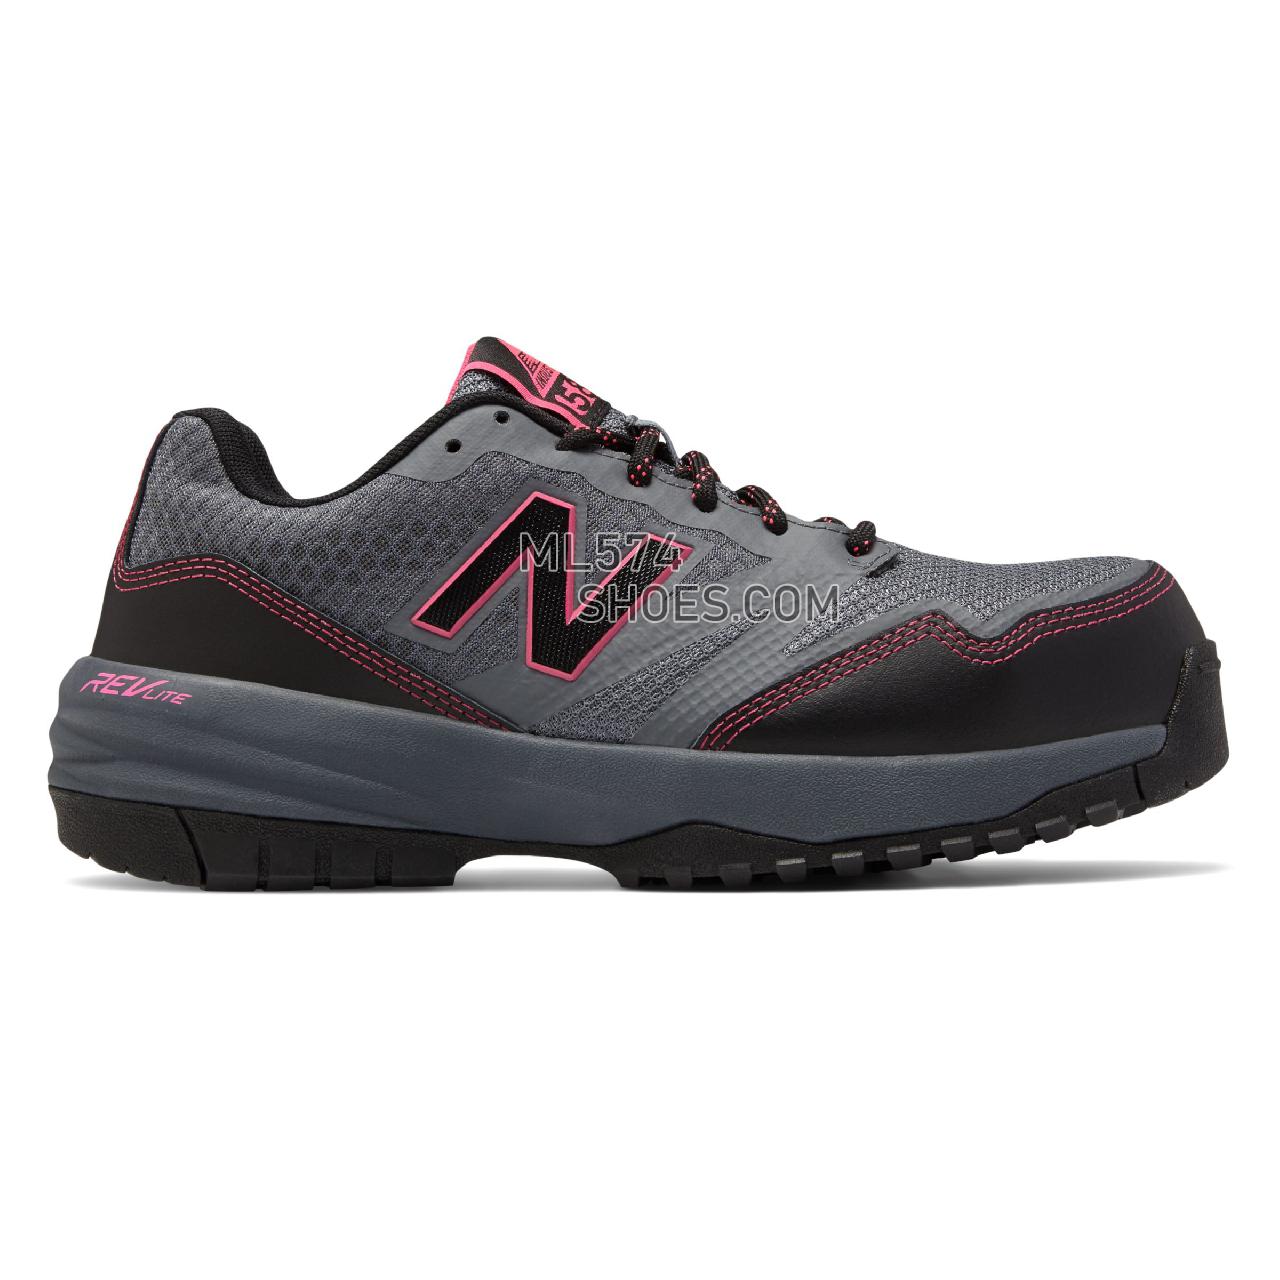 New Balance Composite Toe 589 - Women's 589 - Industrial Grey with Pink - WID589T1